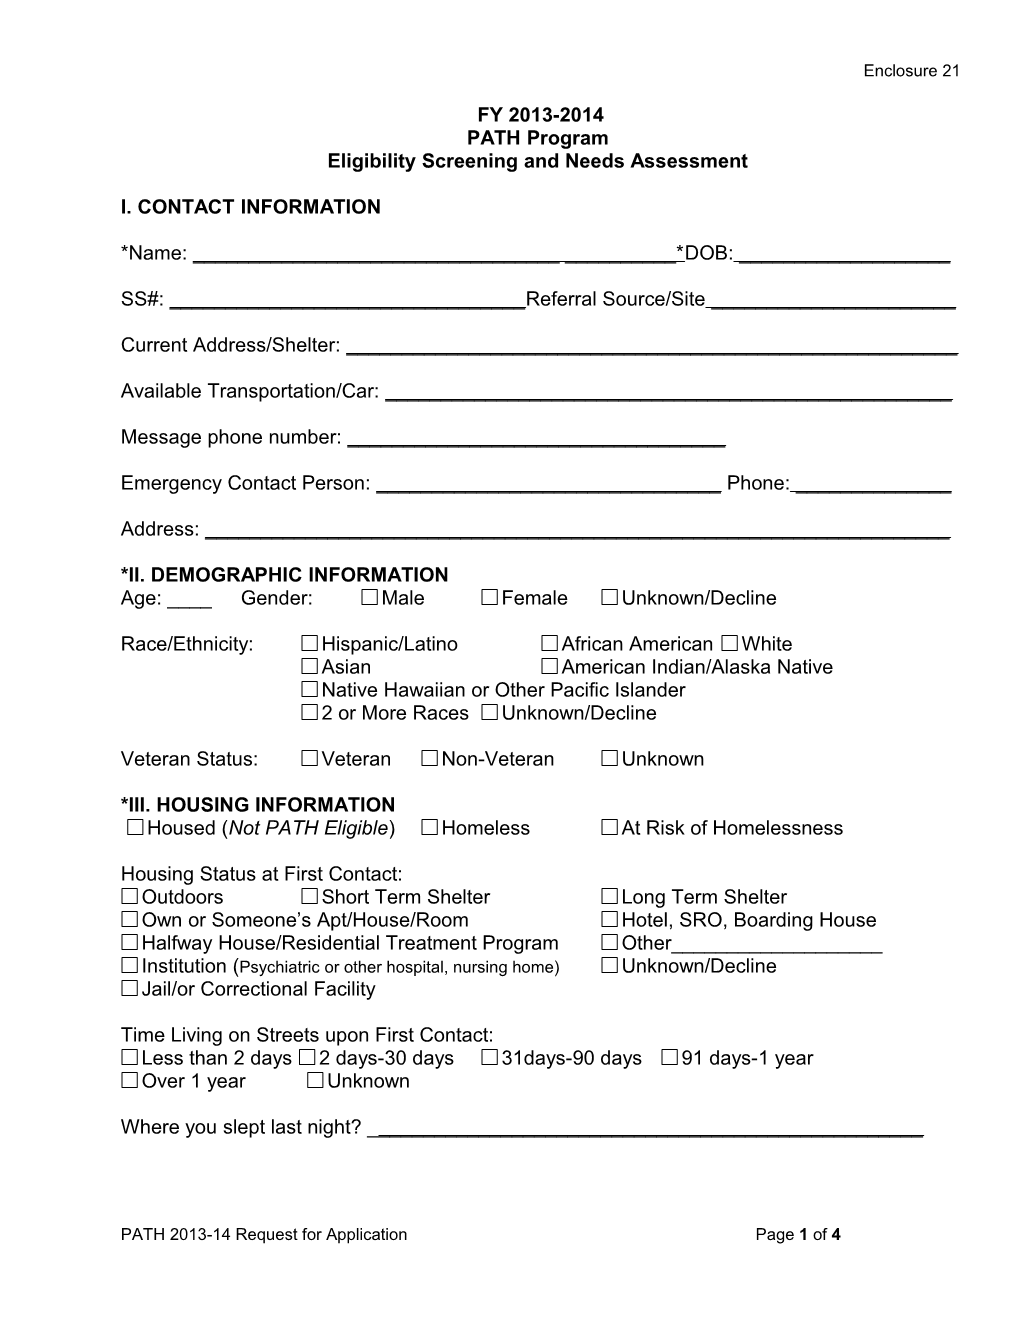 PATH Eligibility Screening and Needs Assessment